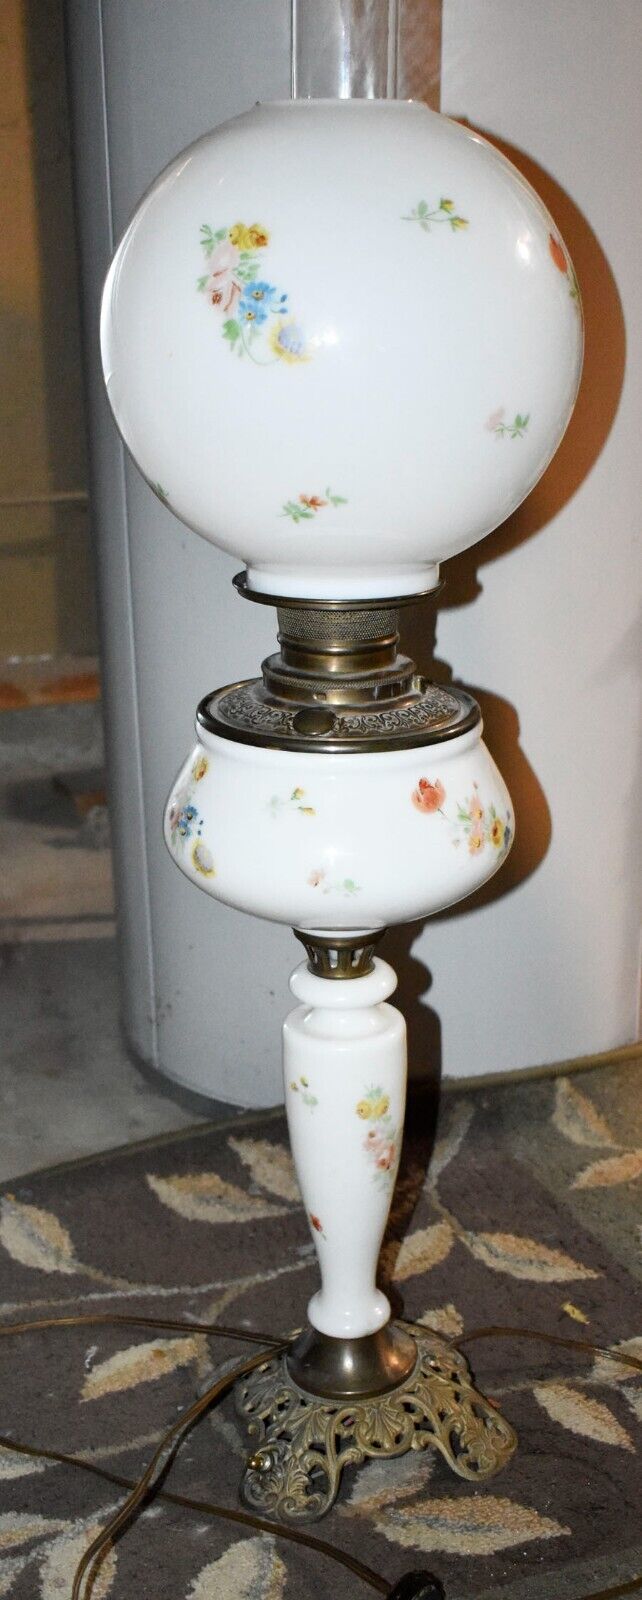 ANTIQUE VICTORIAN BANQUET LAMP COMPLETE WORKS WELL